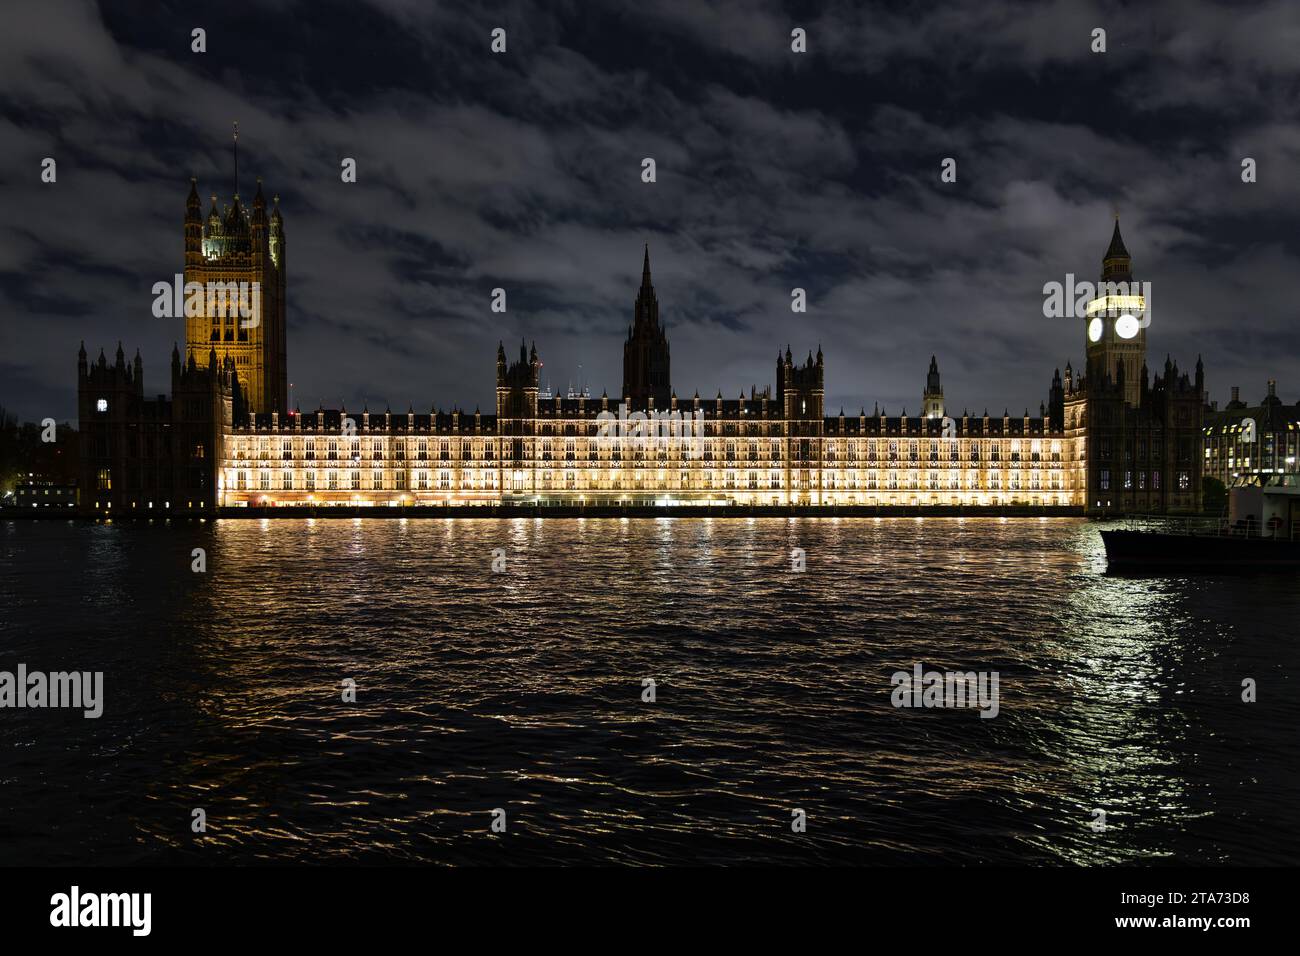 The Palace of Westminster seen lit against a dark sky at night, viewed from the opposite bank of the River Thames, London, UK Stock Photo